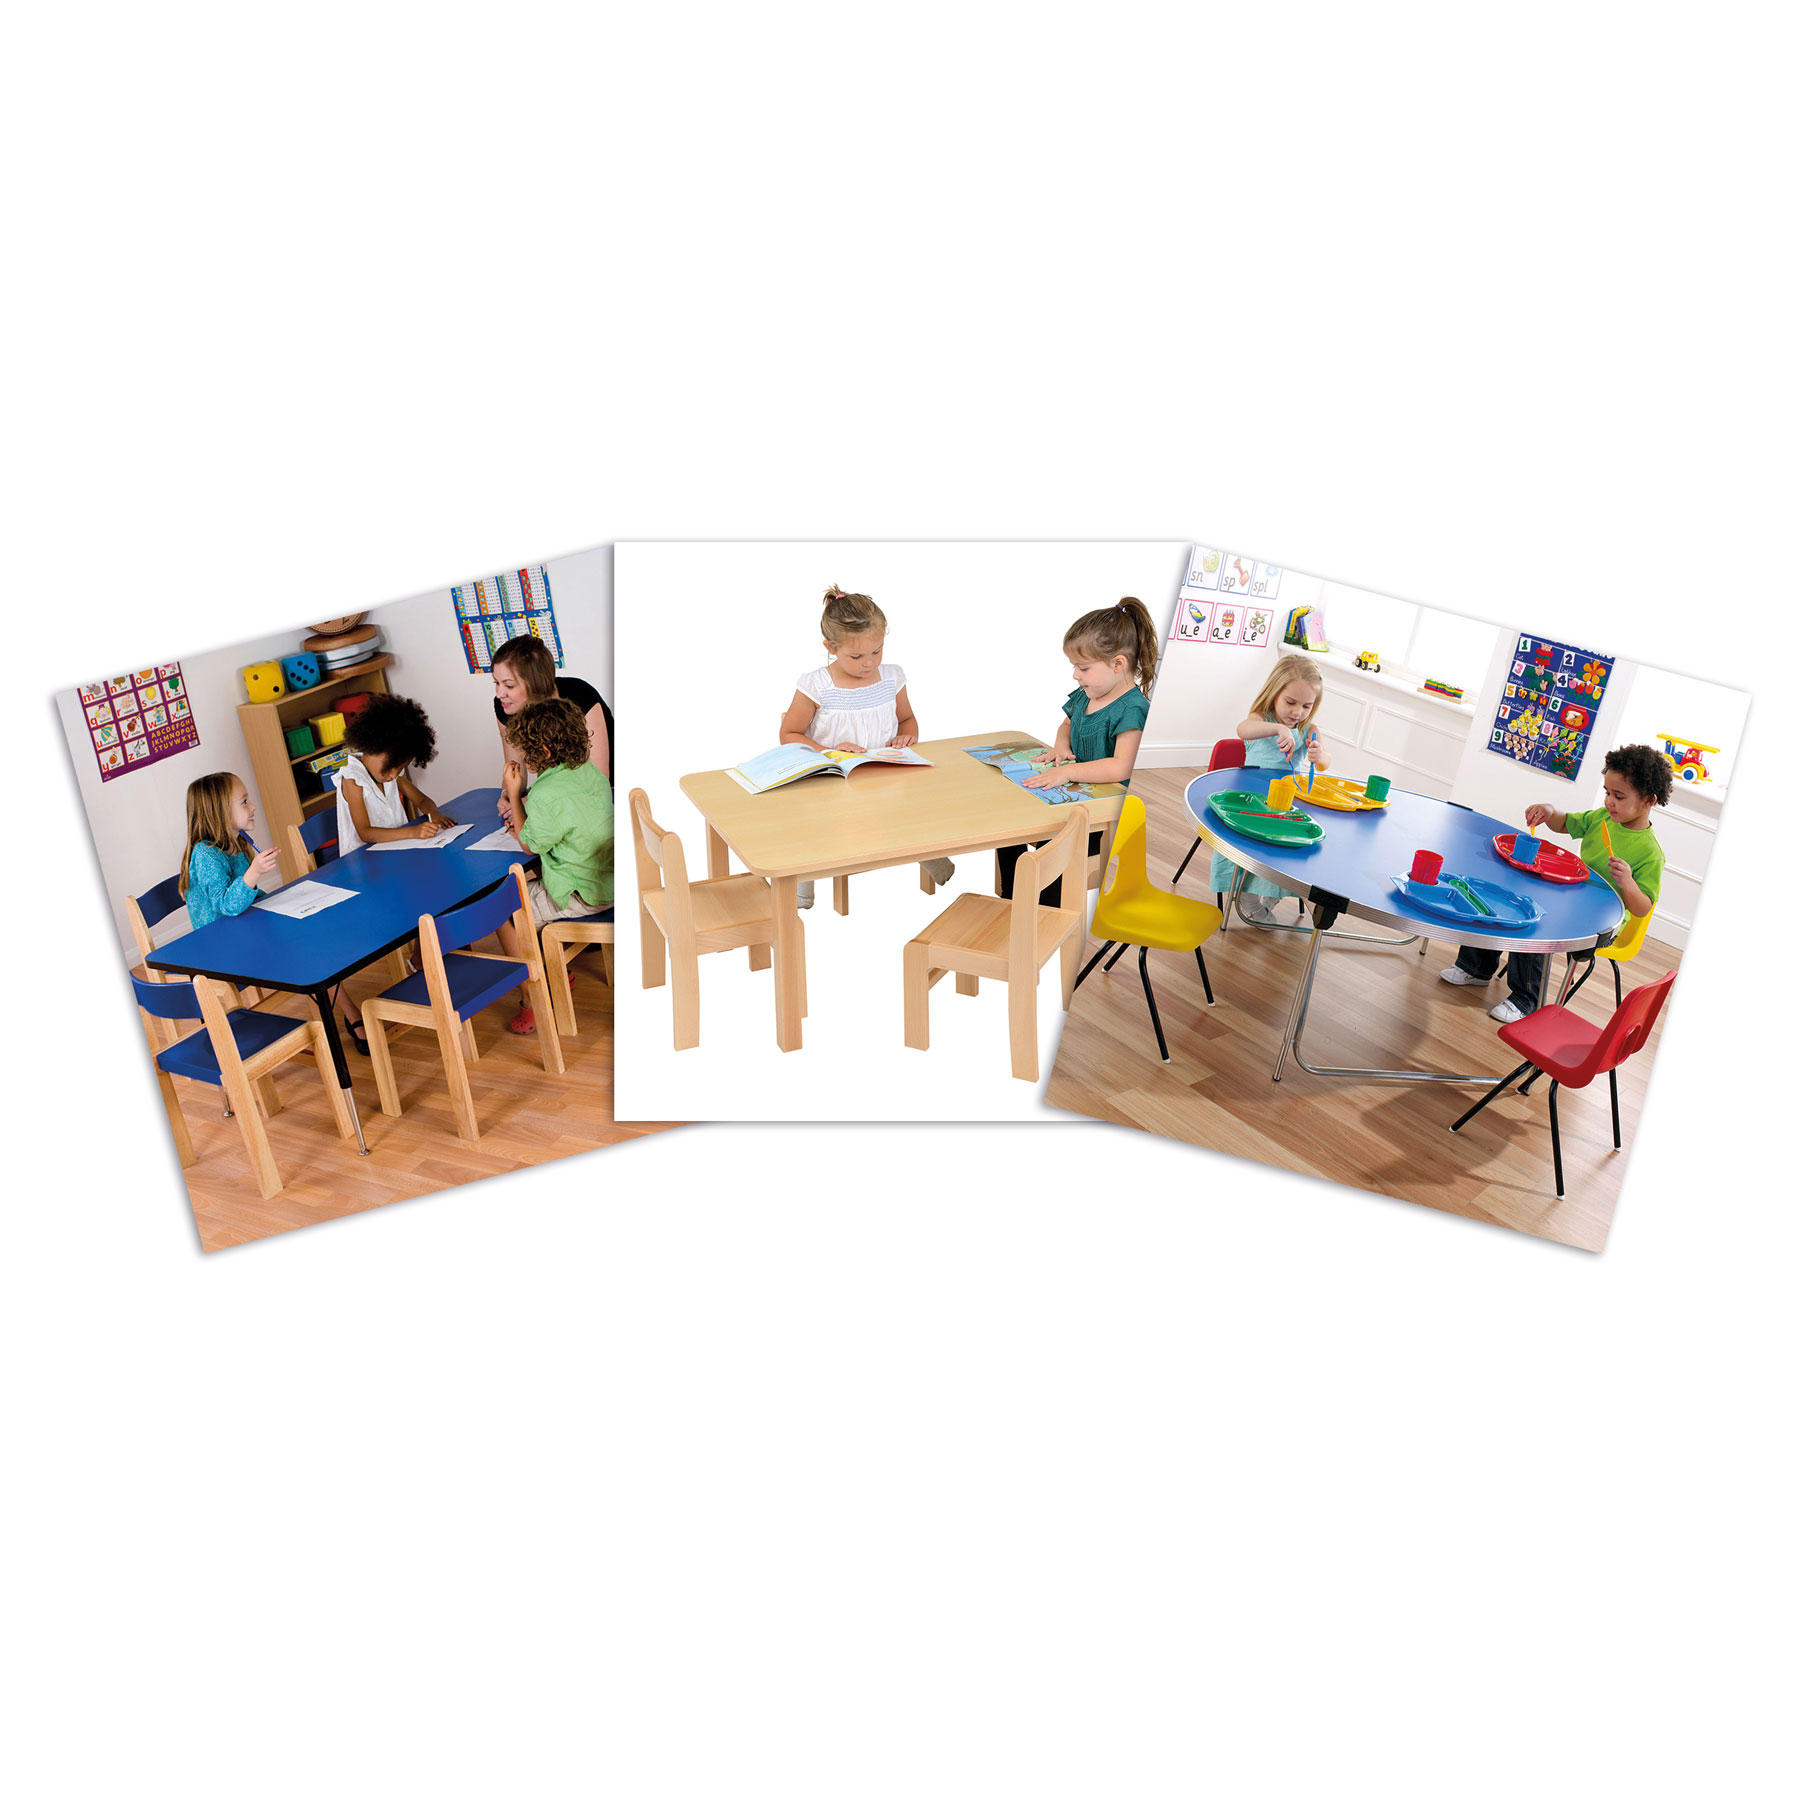 All Children's Tables